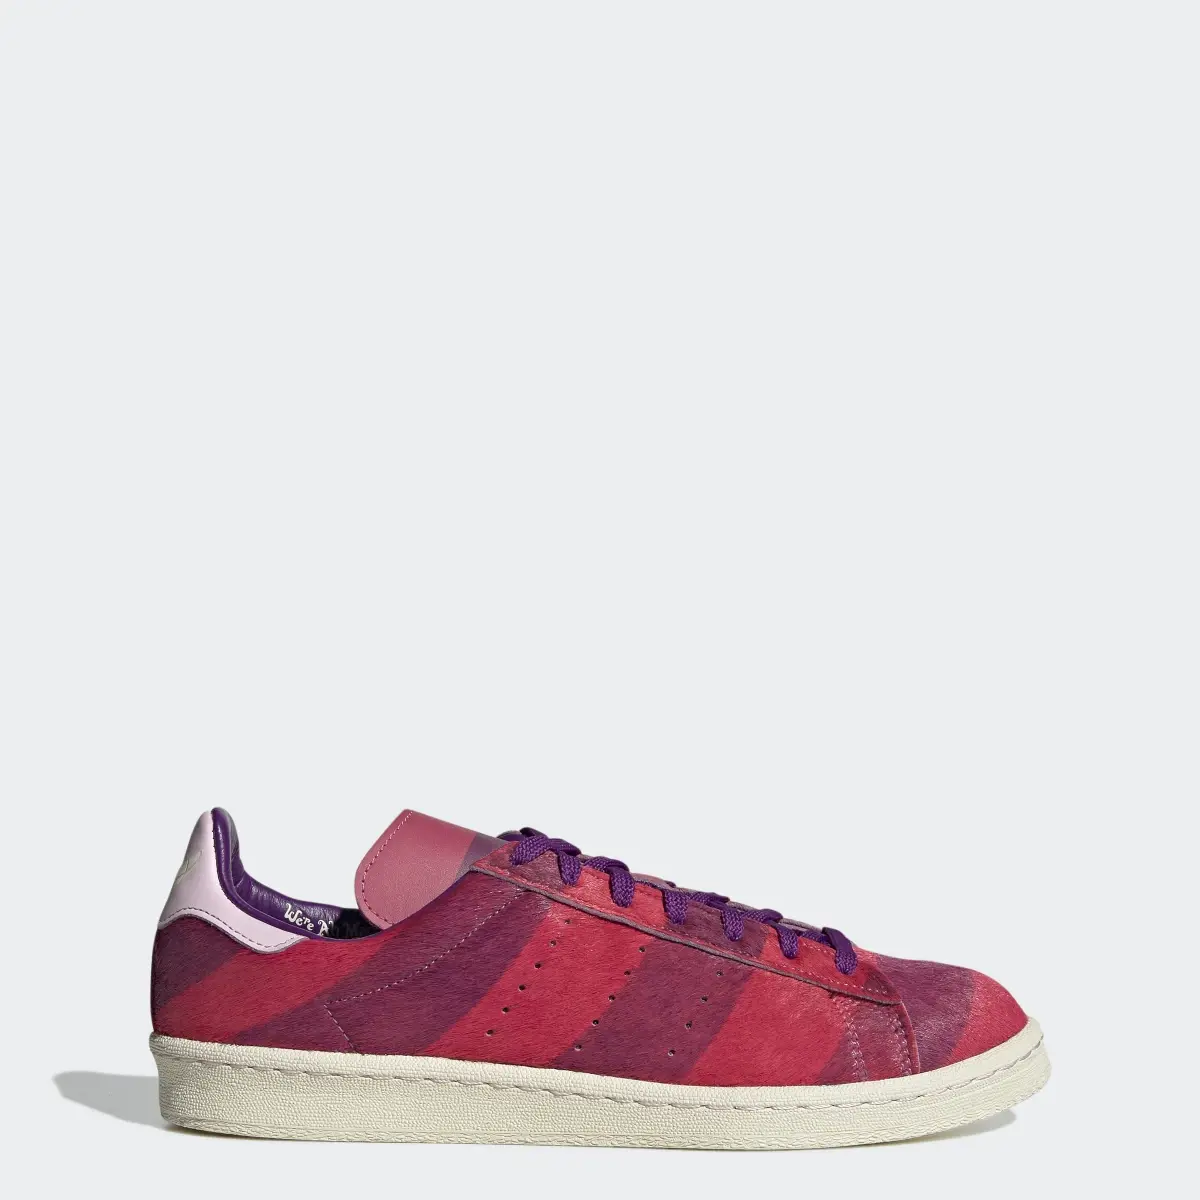 Adidas Campus 80s Cheshire Cat Shoes. 1